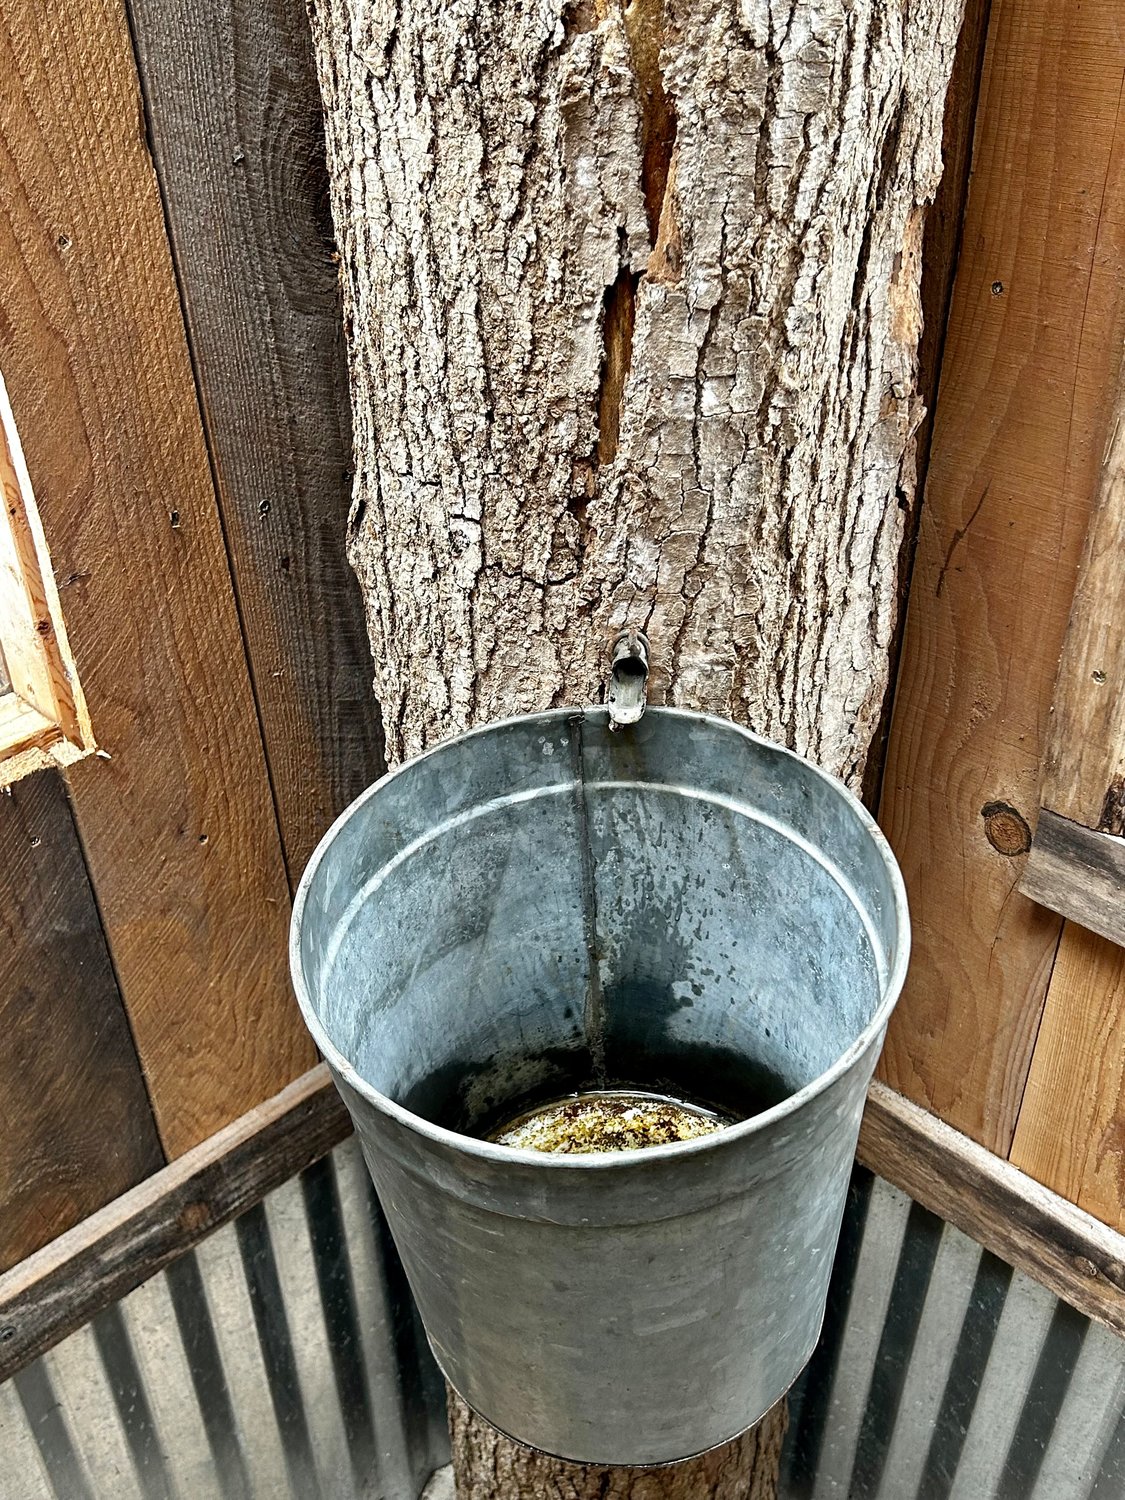 A bucket where sap is collected.